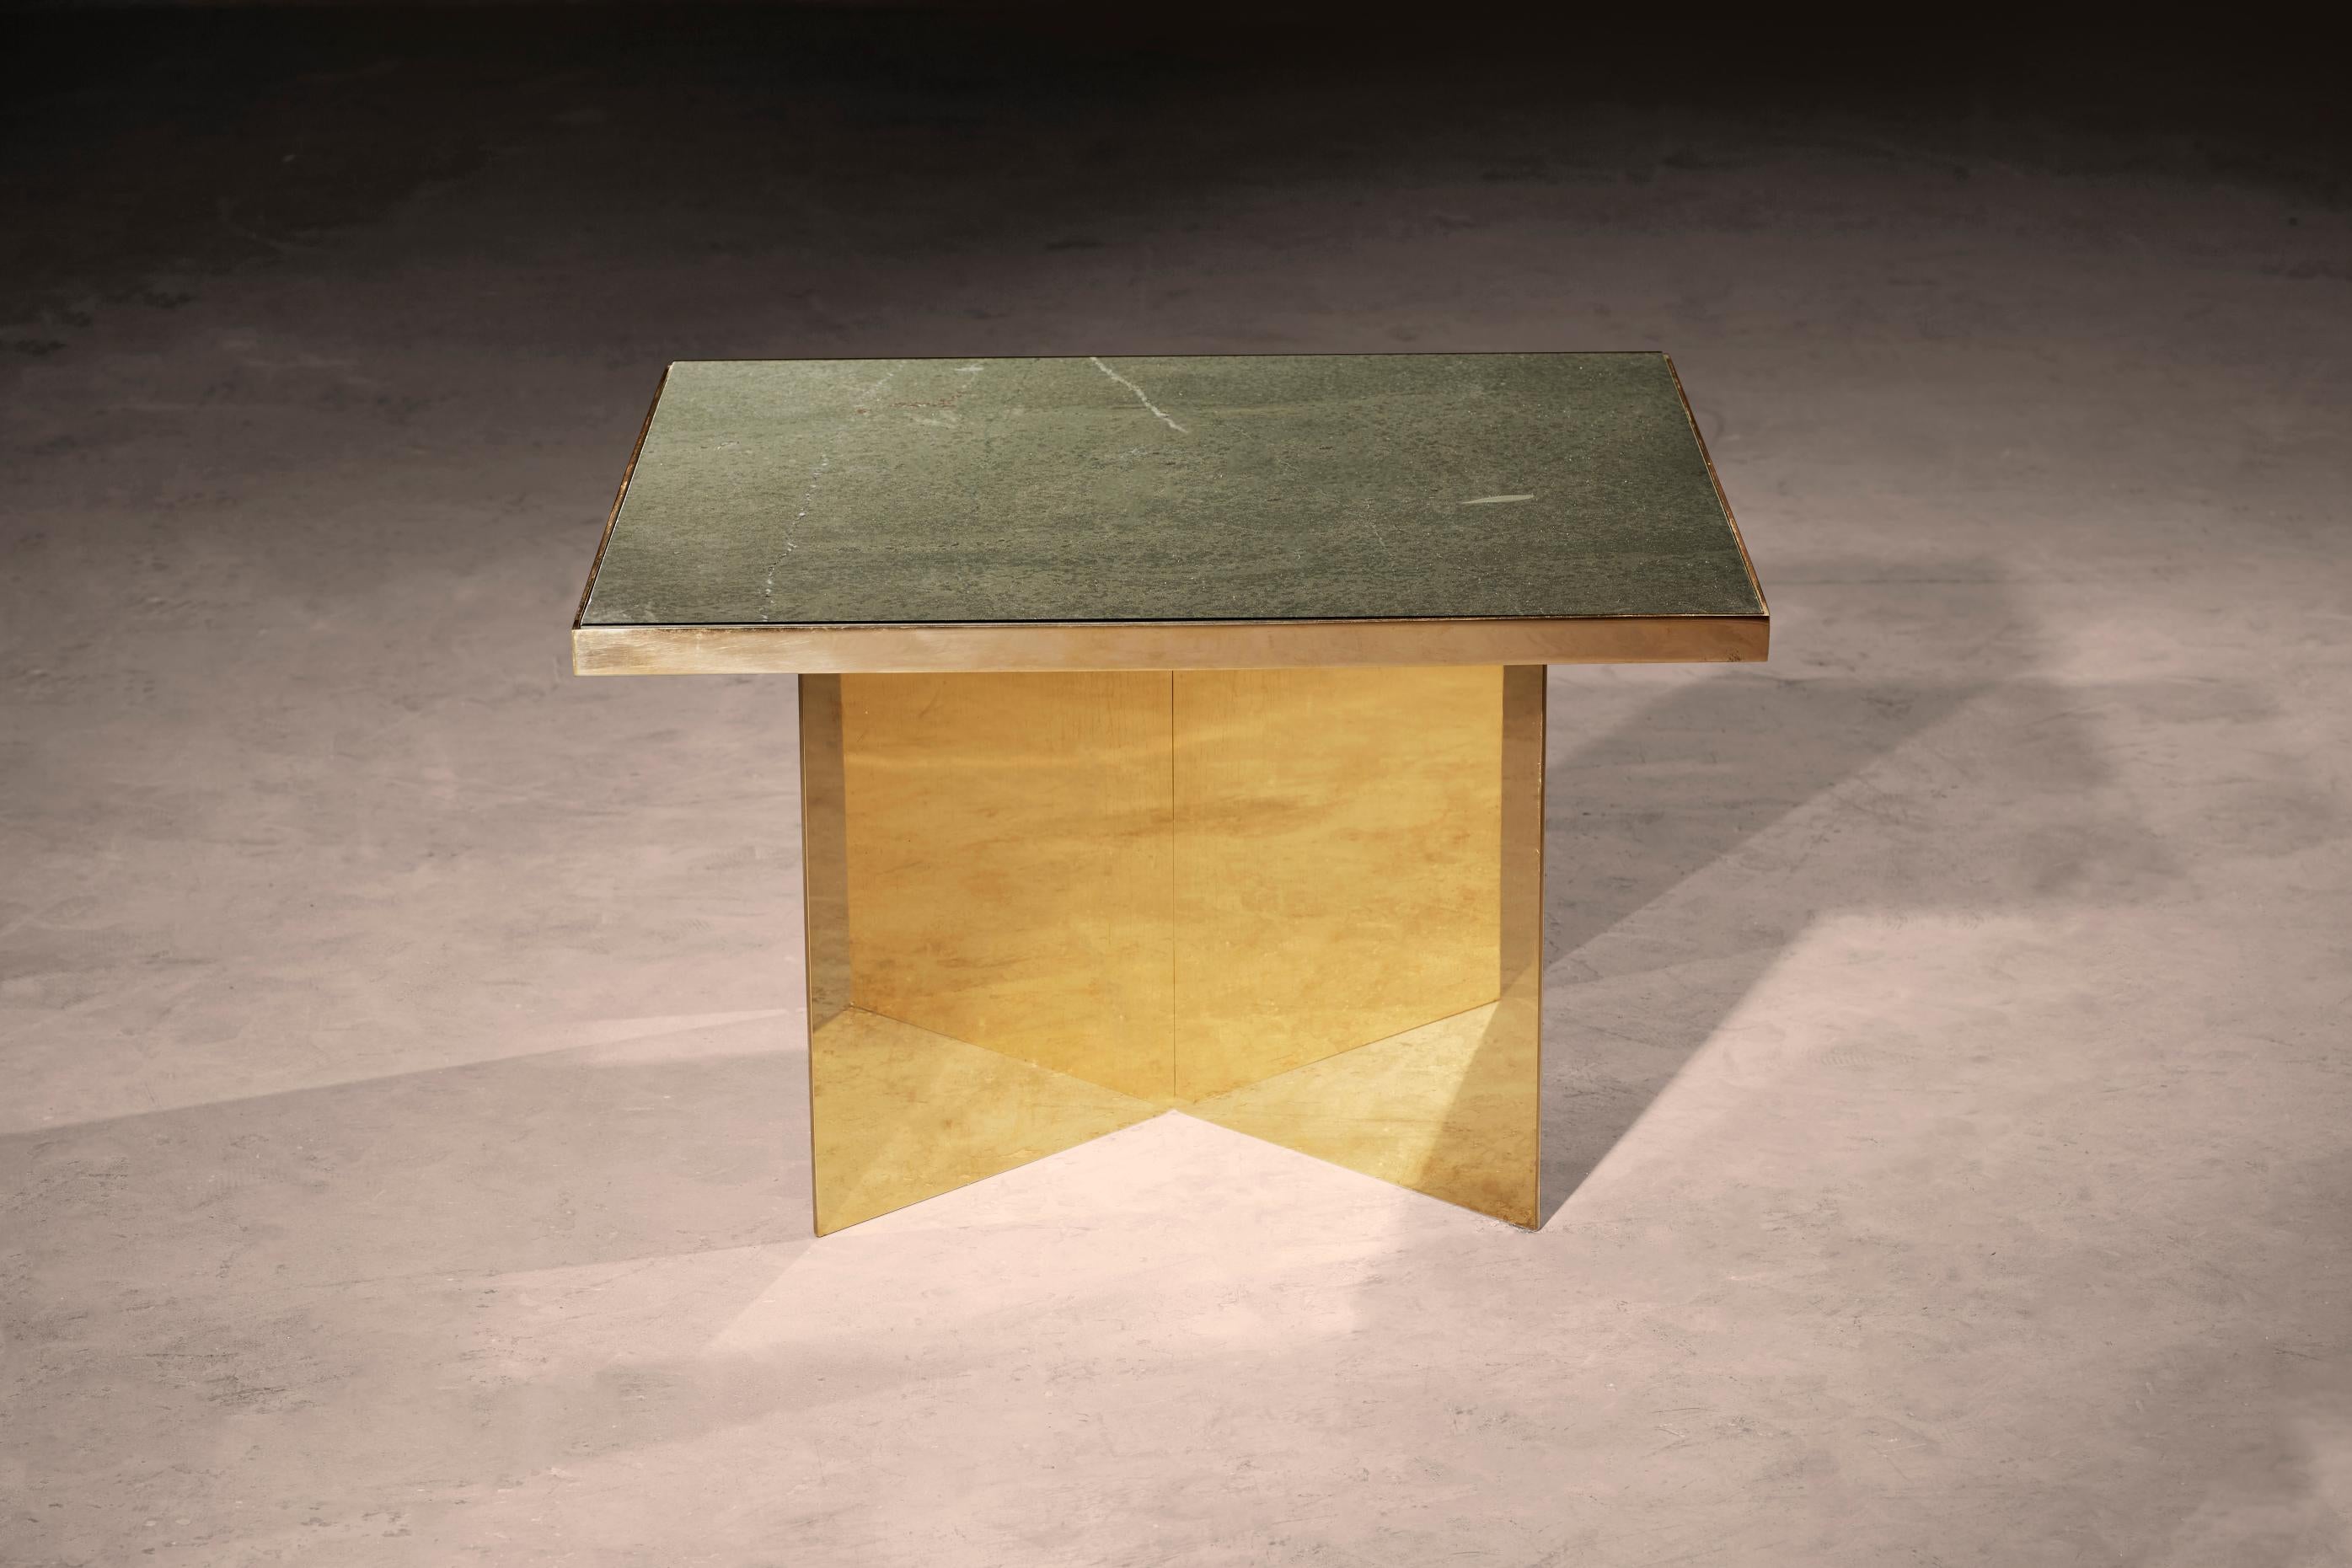 Verdi Green slate handcrafted coffee table Signed by Novocastrian.
Measures: 60cm (length) x 60cm (width) x 32cm (height).
Materials:Patinated Brass
Hand-finished brass with honed Cumbrian green slate from England's Lake District. Handcrafted to